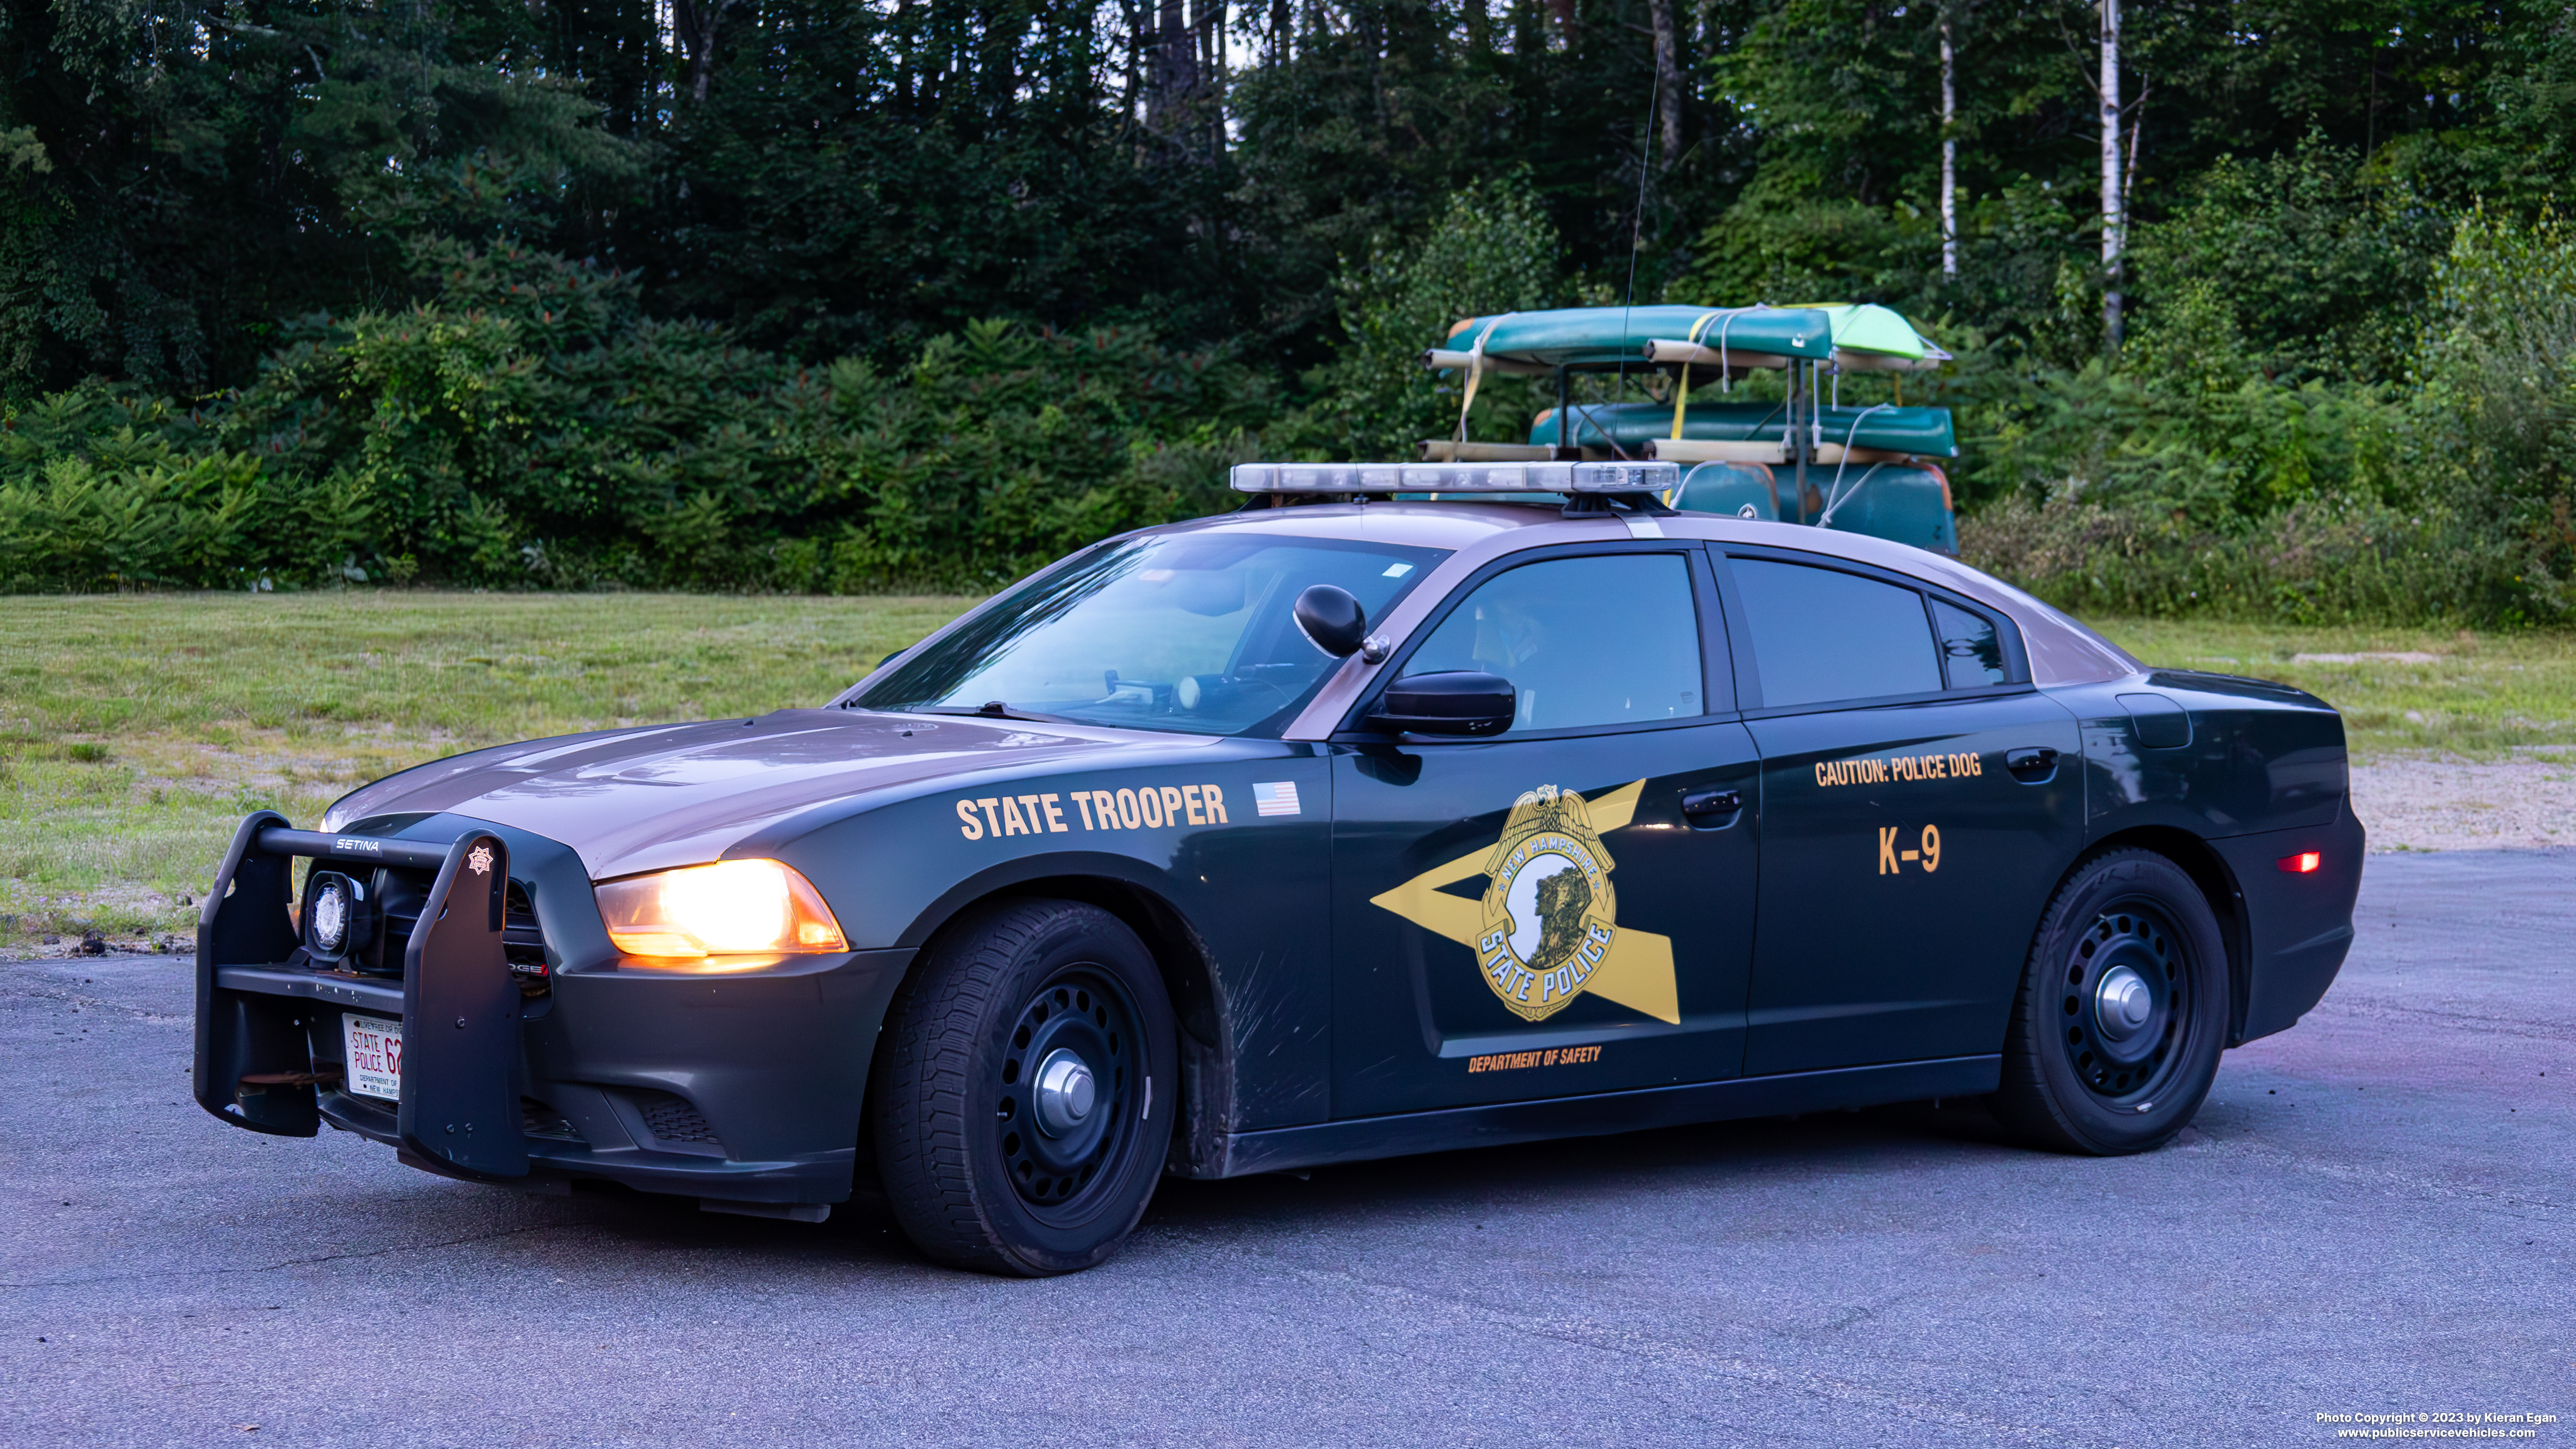 A photo  of New Hampshire State Police
            Cruiser 626, a 2014 Dodge Charger             taken by Kieran Egan